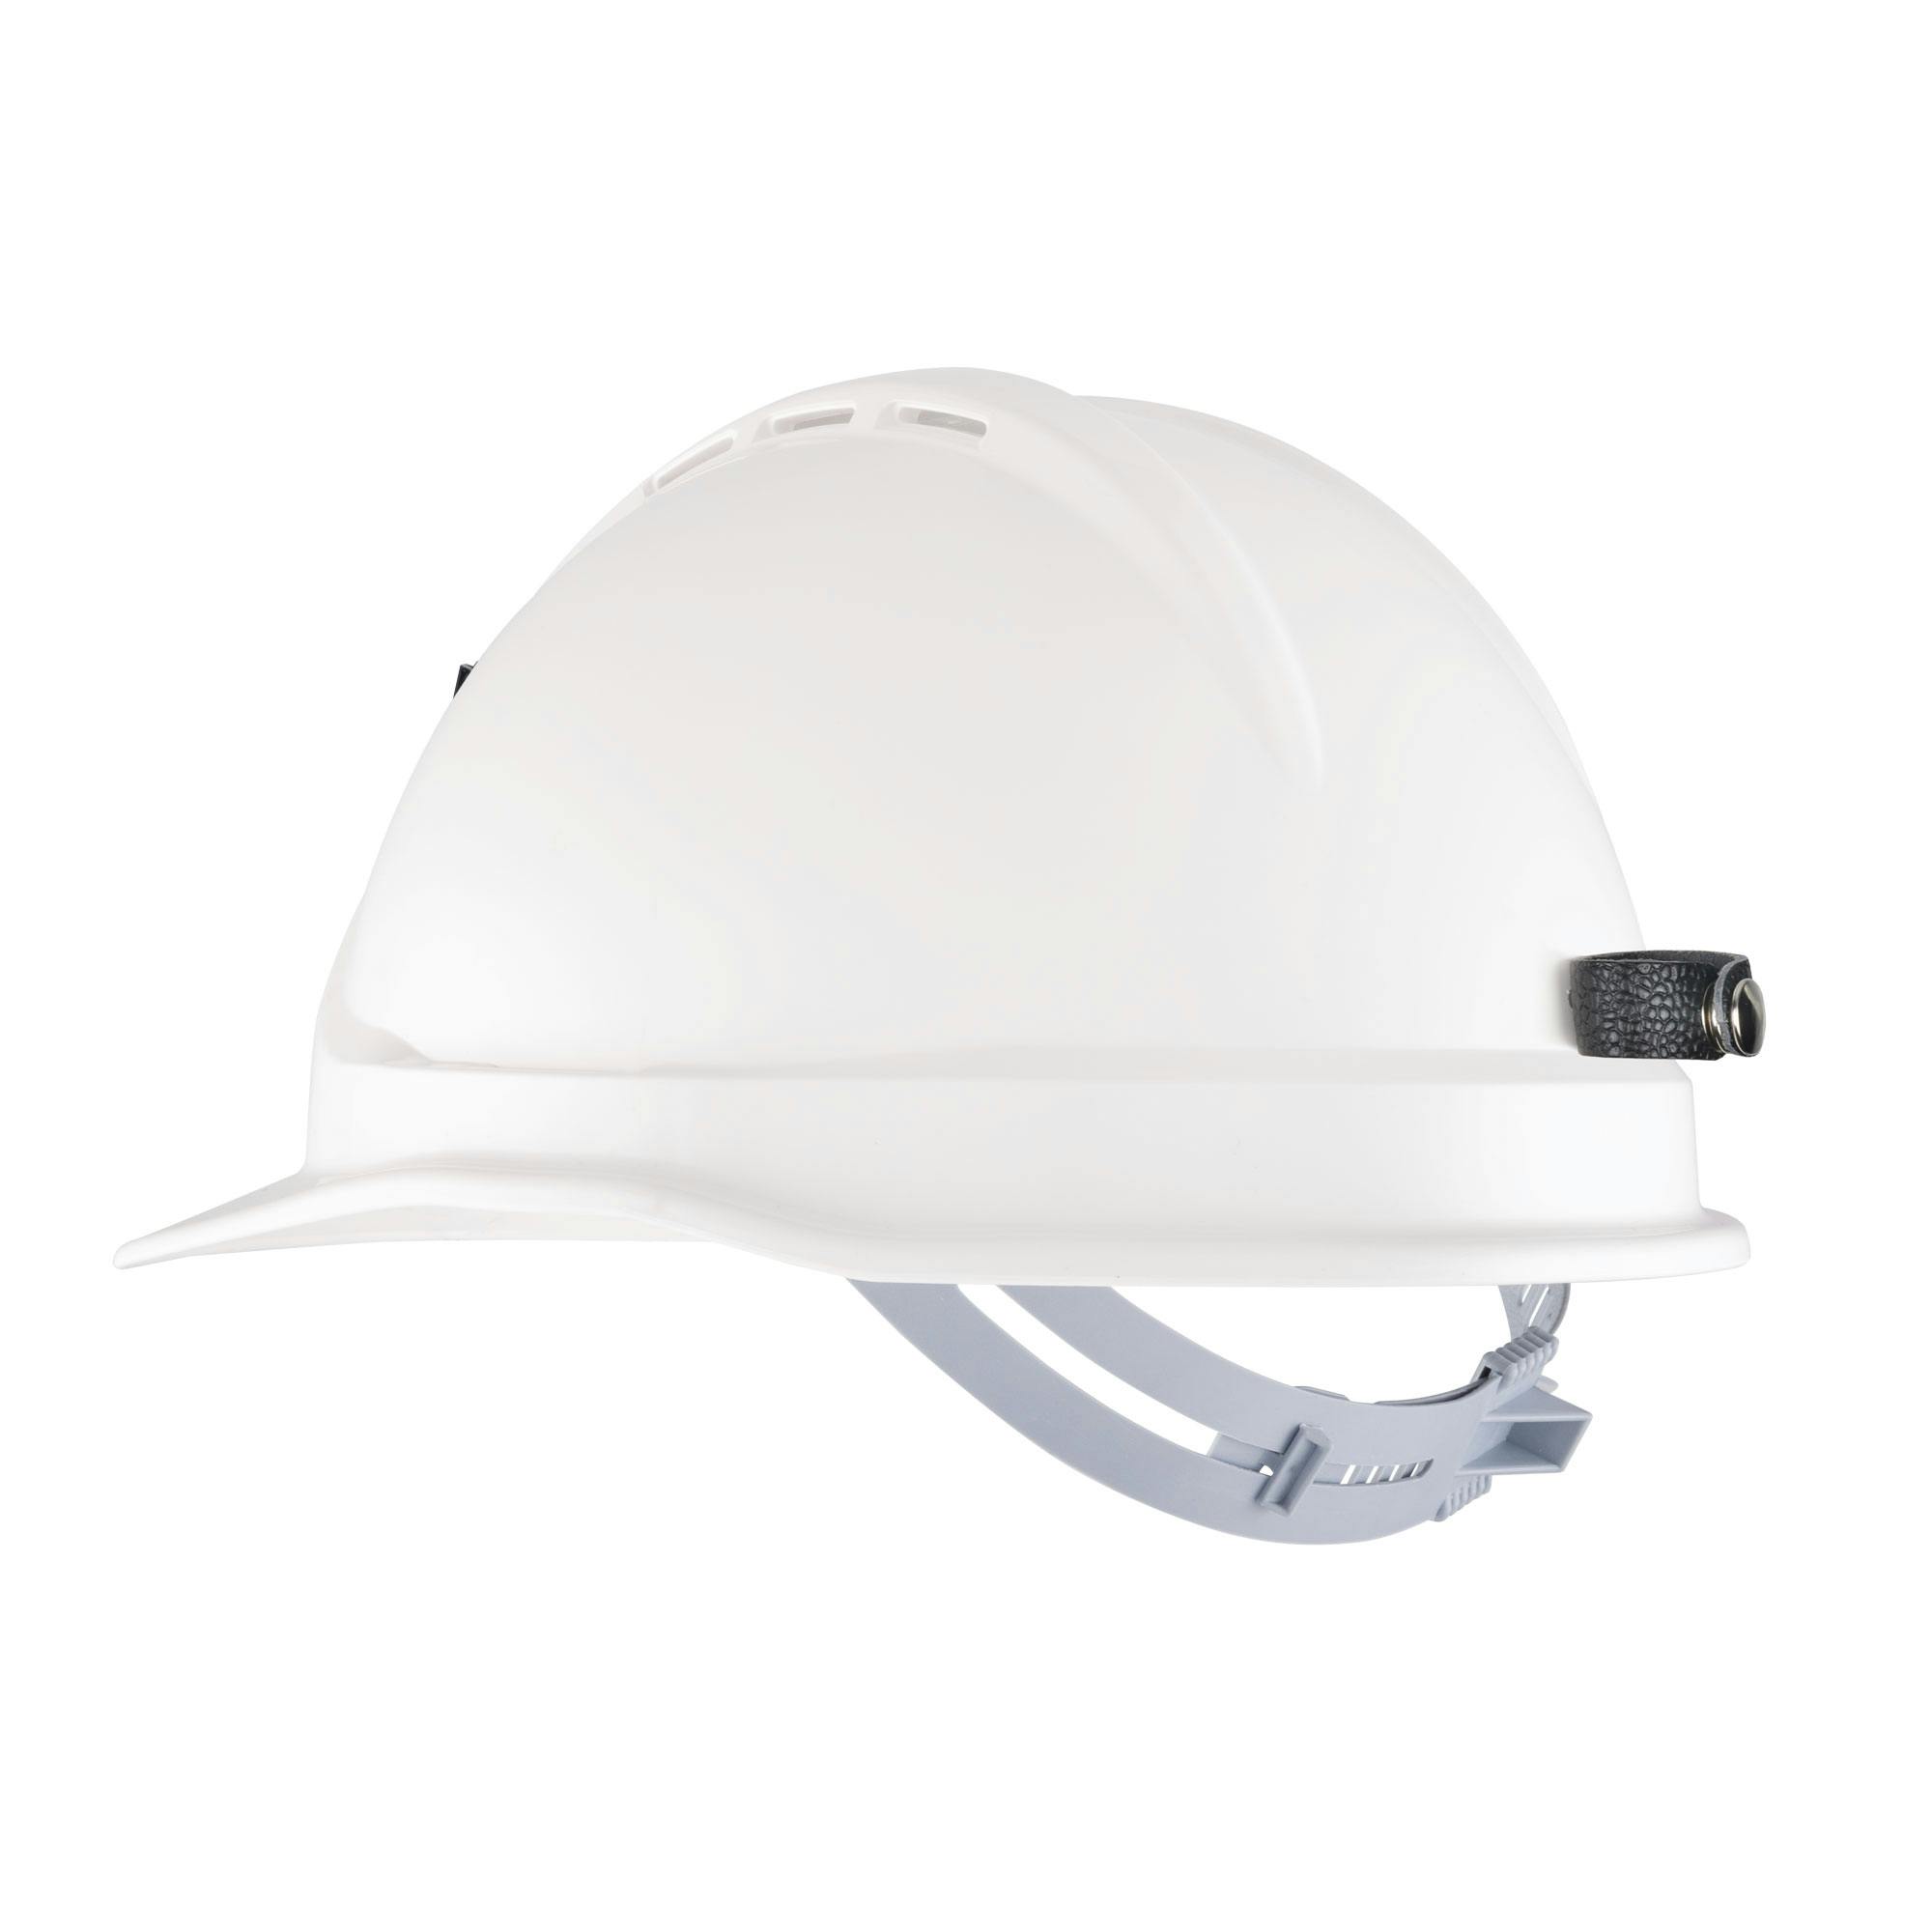 Force360 GTE9 ABS Vented Miners Hard Hat With Slide Lock Harness, Type1 (White)